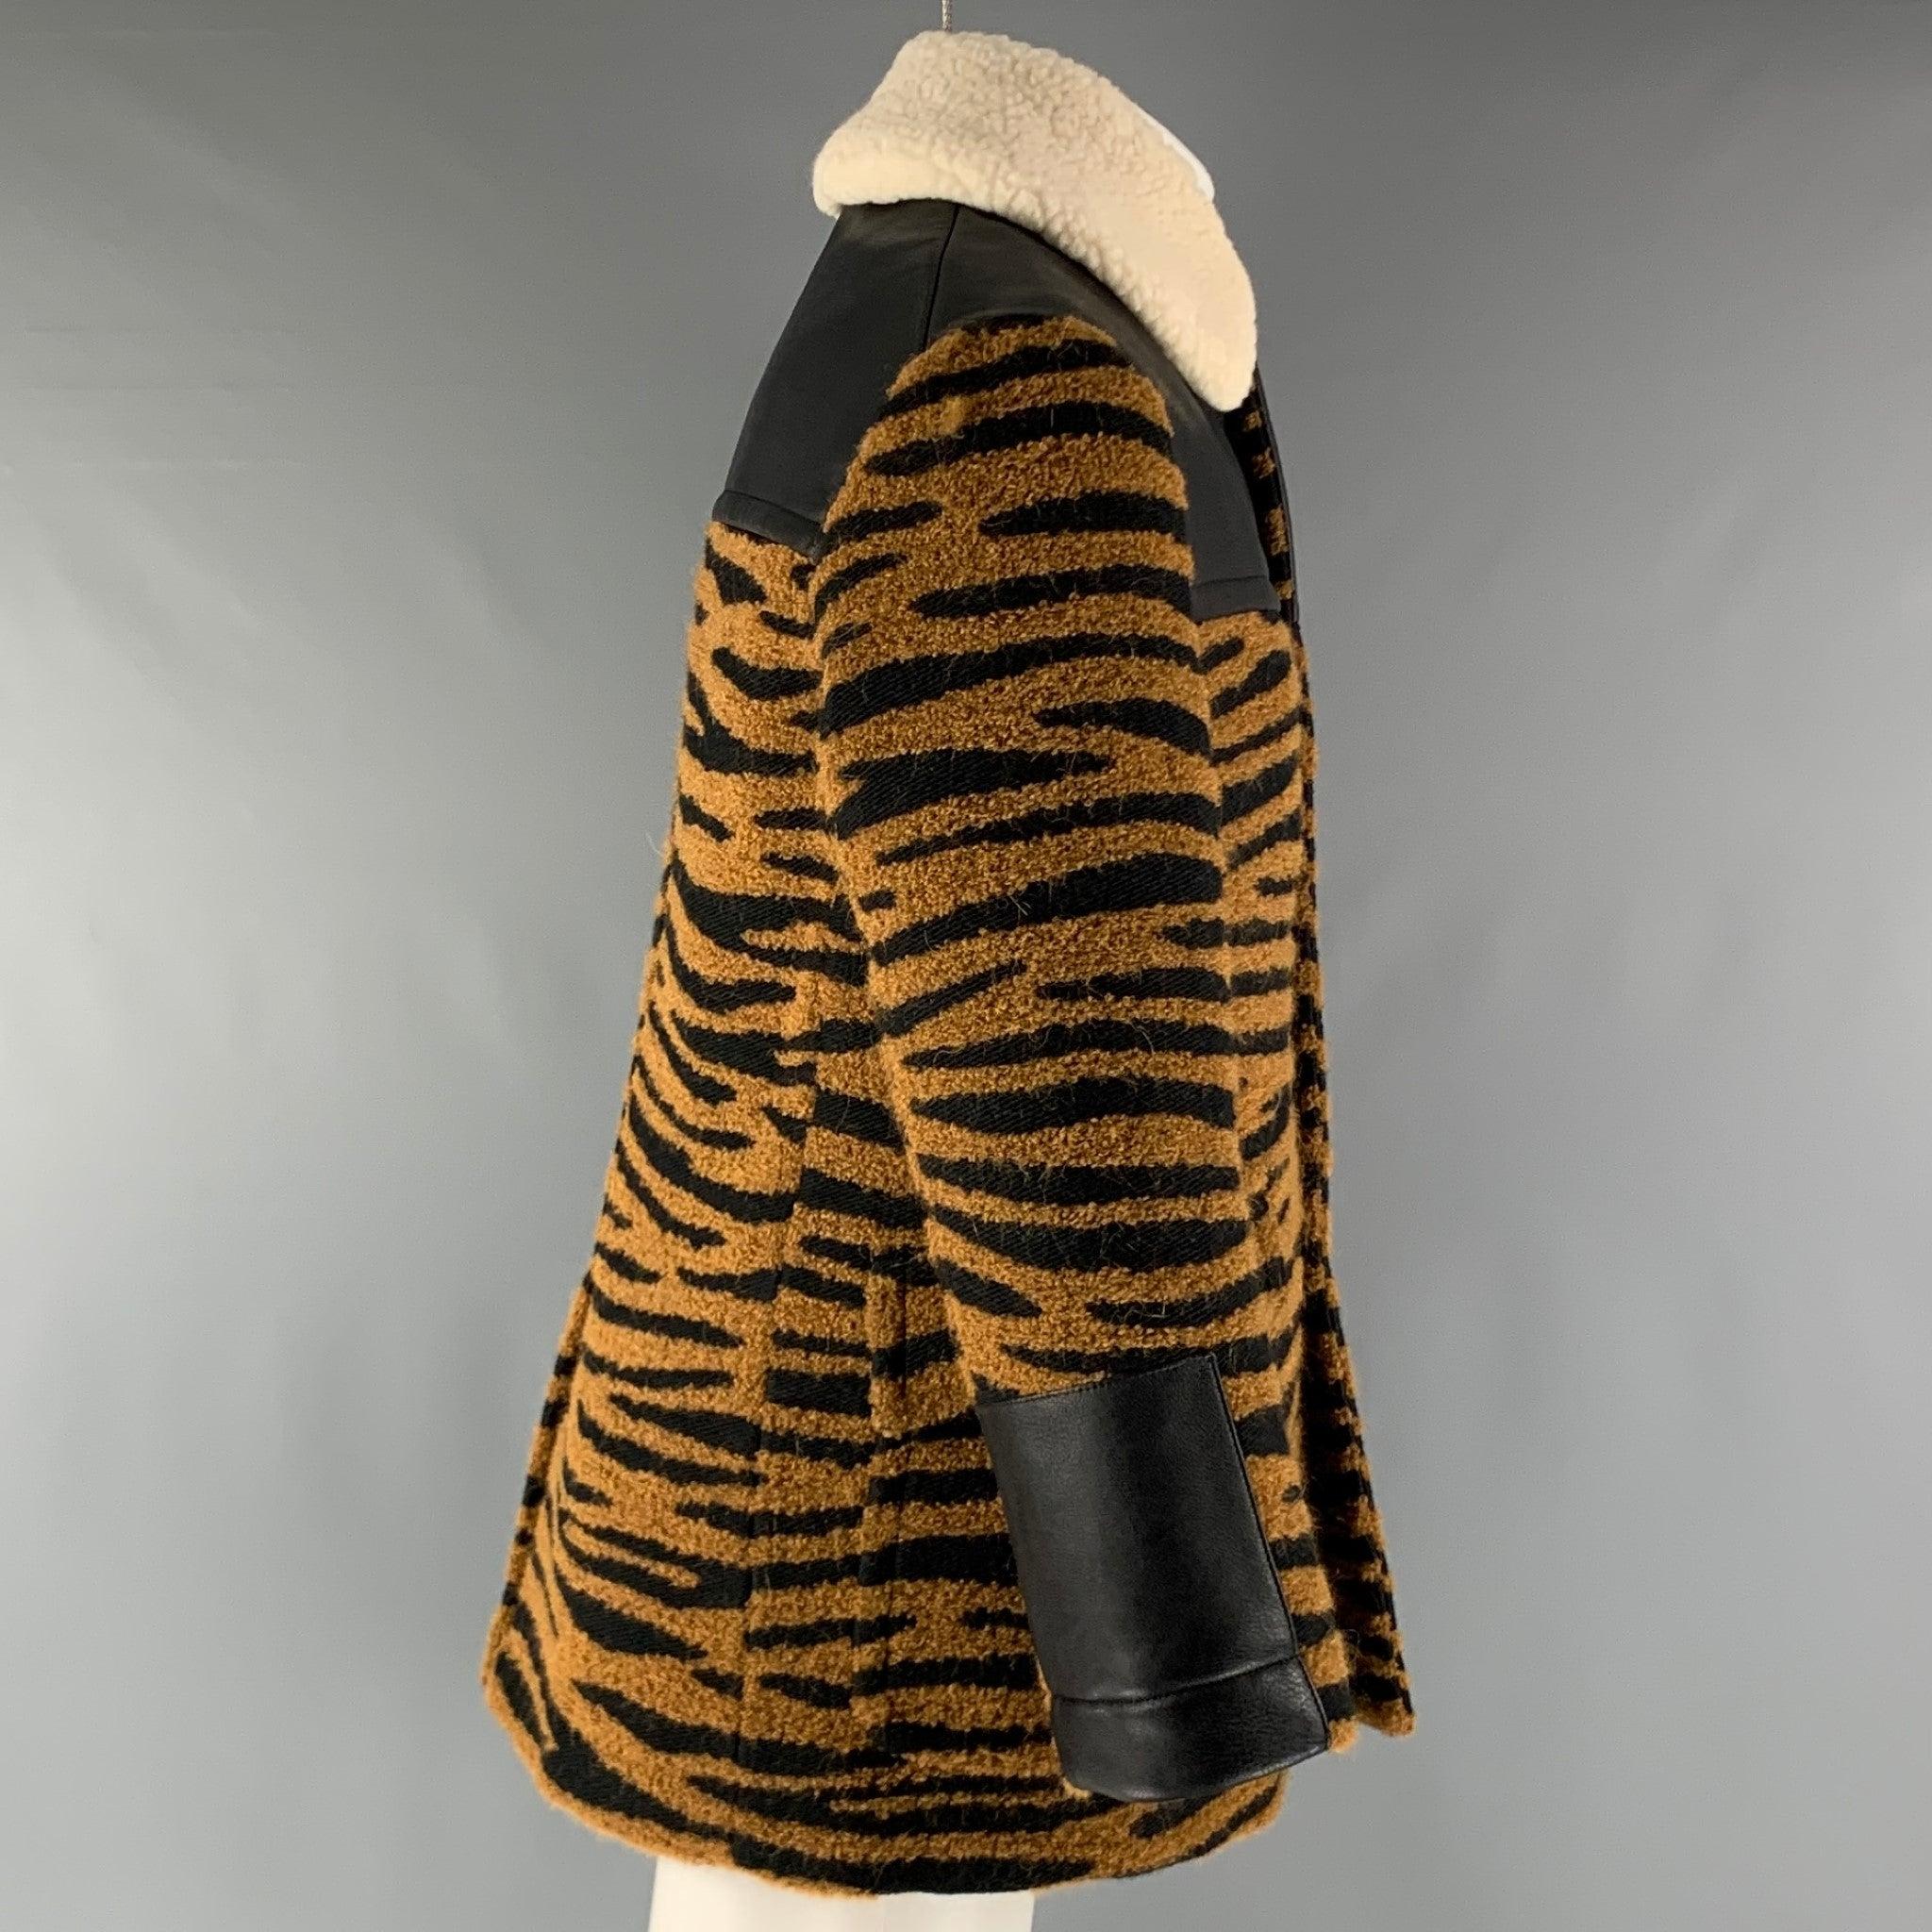 STELLA McCARTNEY coat comes in a black & tan animal print polyester heavy material featuring a black quilted lining, sherpa fleece cream collar, flap pockets, and a button up closure. Made in
Italy.Very Good Pre-Owned Condition. Minor signs of Wear.